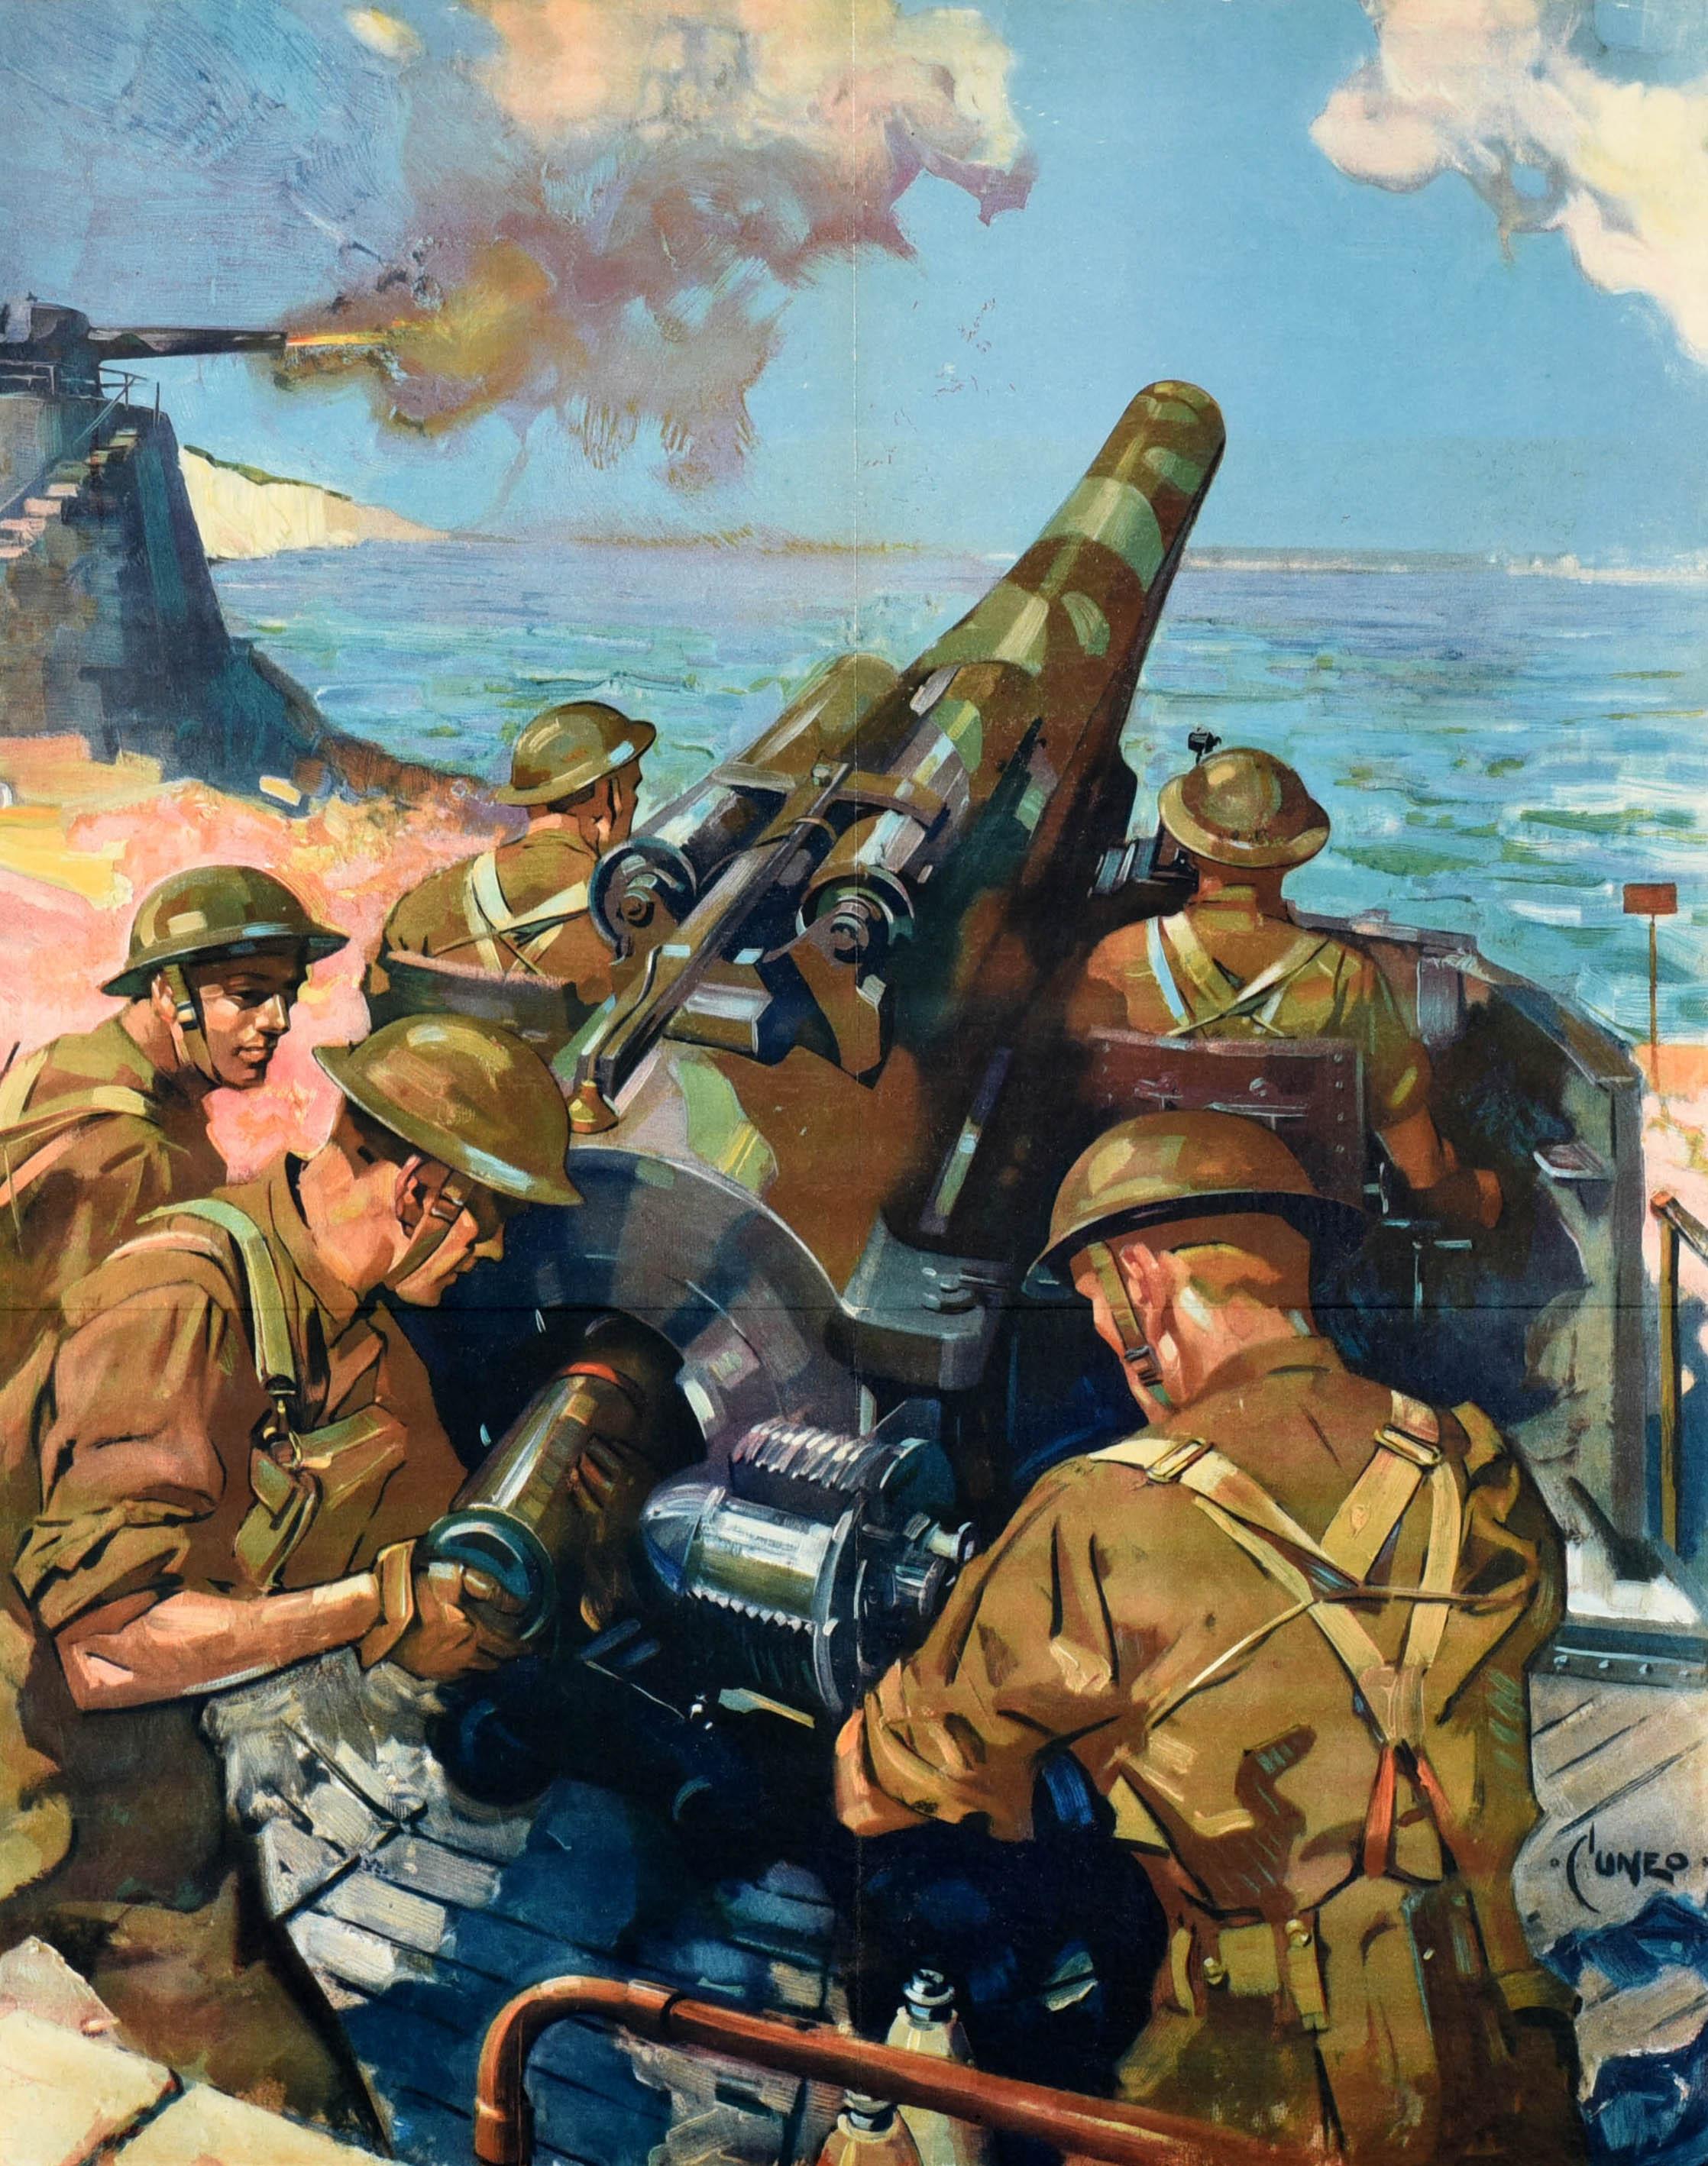 Original vintage World War Two propaganda poster - Help Britain Finish the Job! - featuring dramatic artwork by the notable British artist Terence Tenison Cuneo (1907-1996) showing five soldiers in uniform loading and firing a cannon gun from the